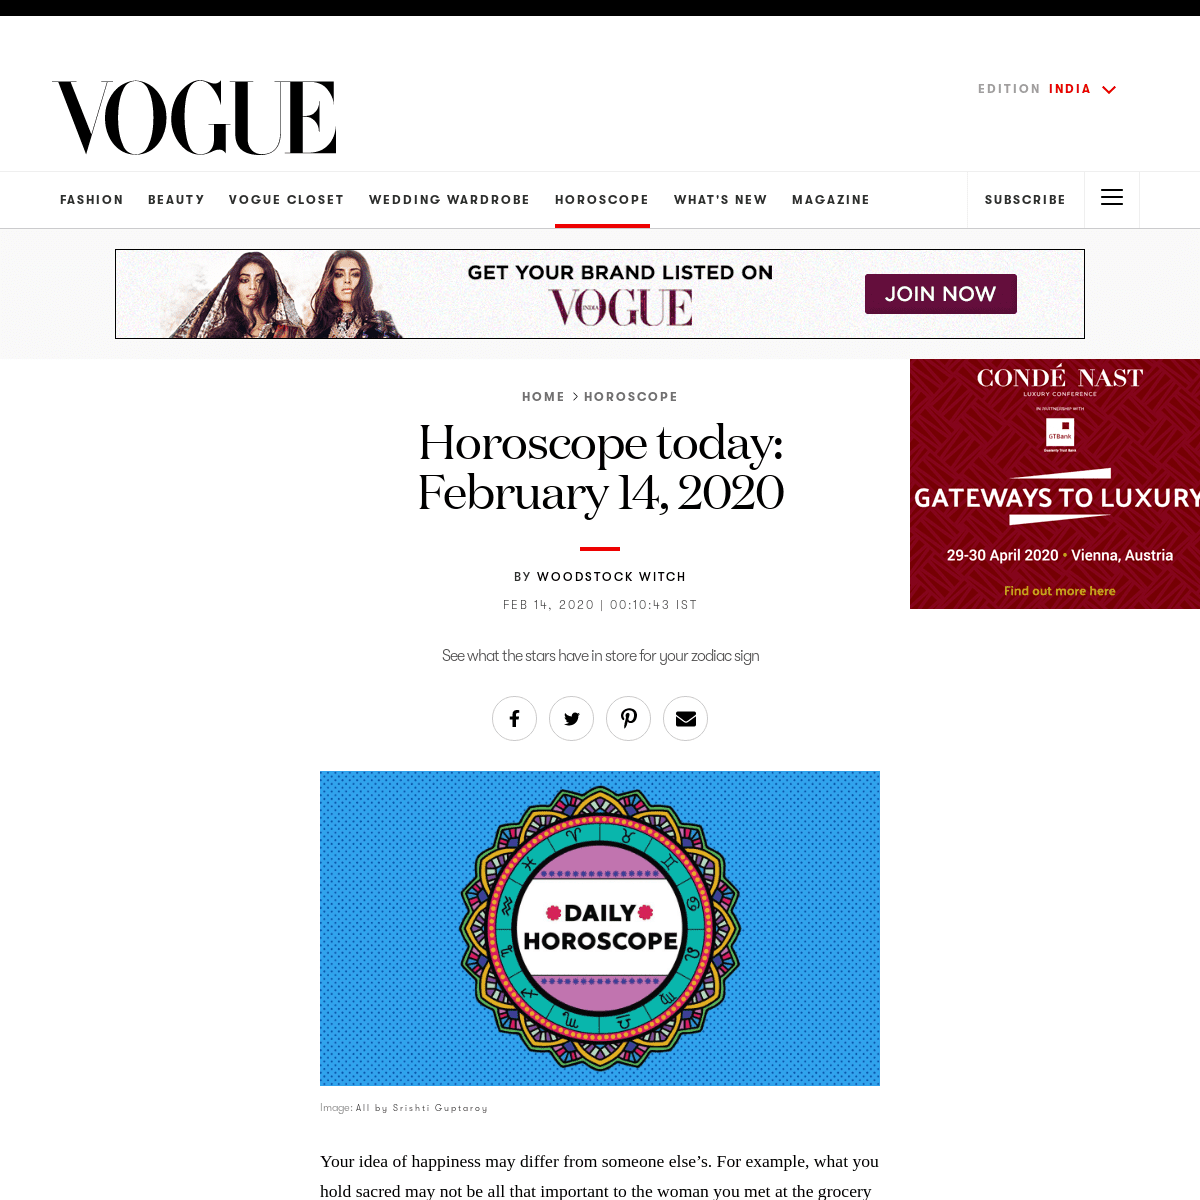 A complete backup of www.vogue.in/horoscope/collection/daily-horoscope-today-14-02-2020-zodiac-signs/